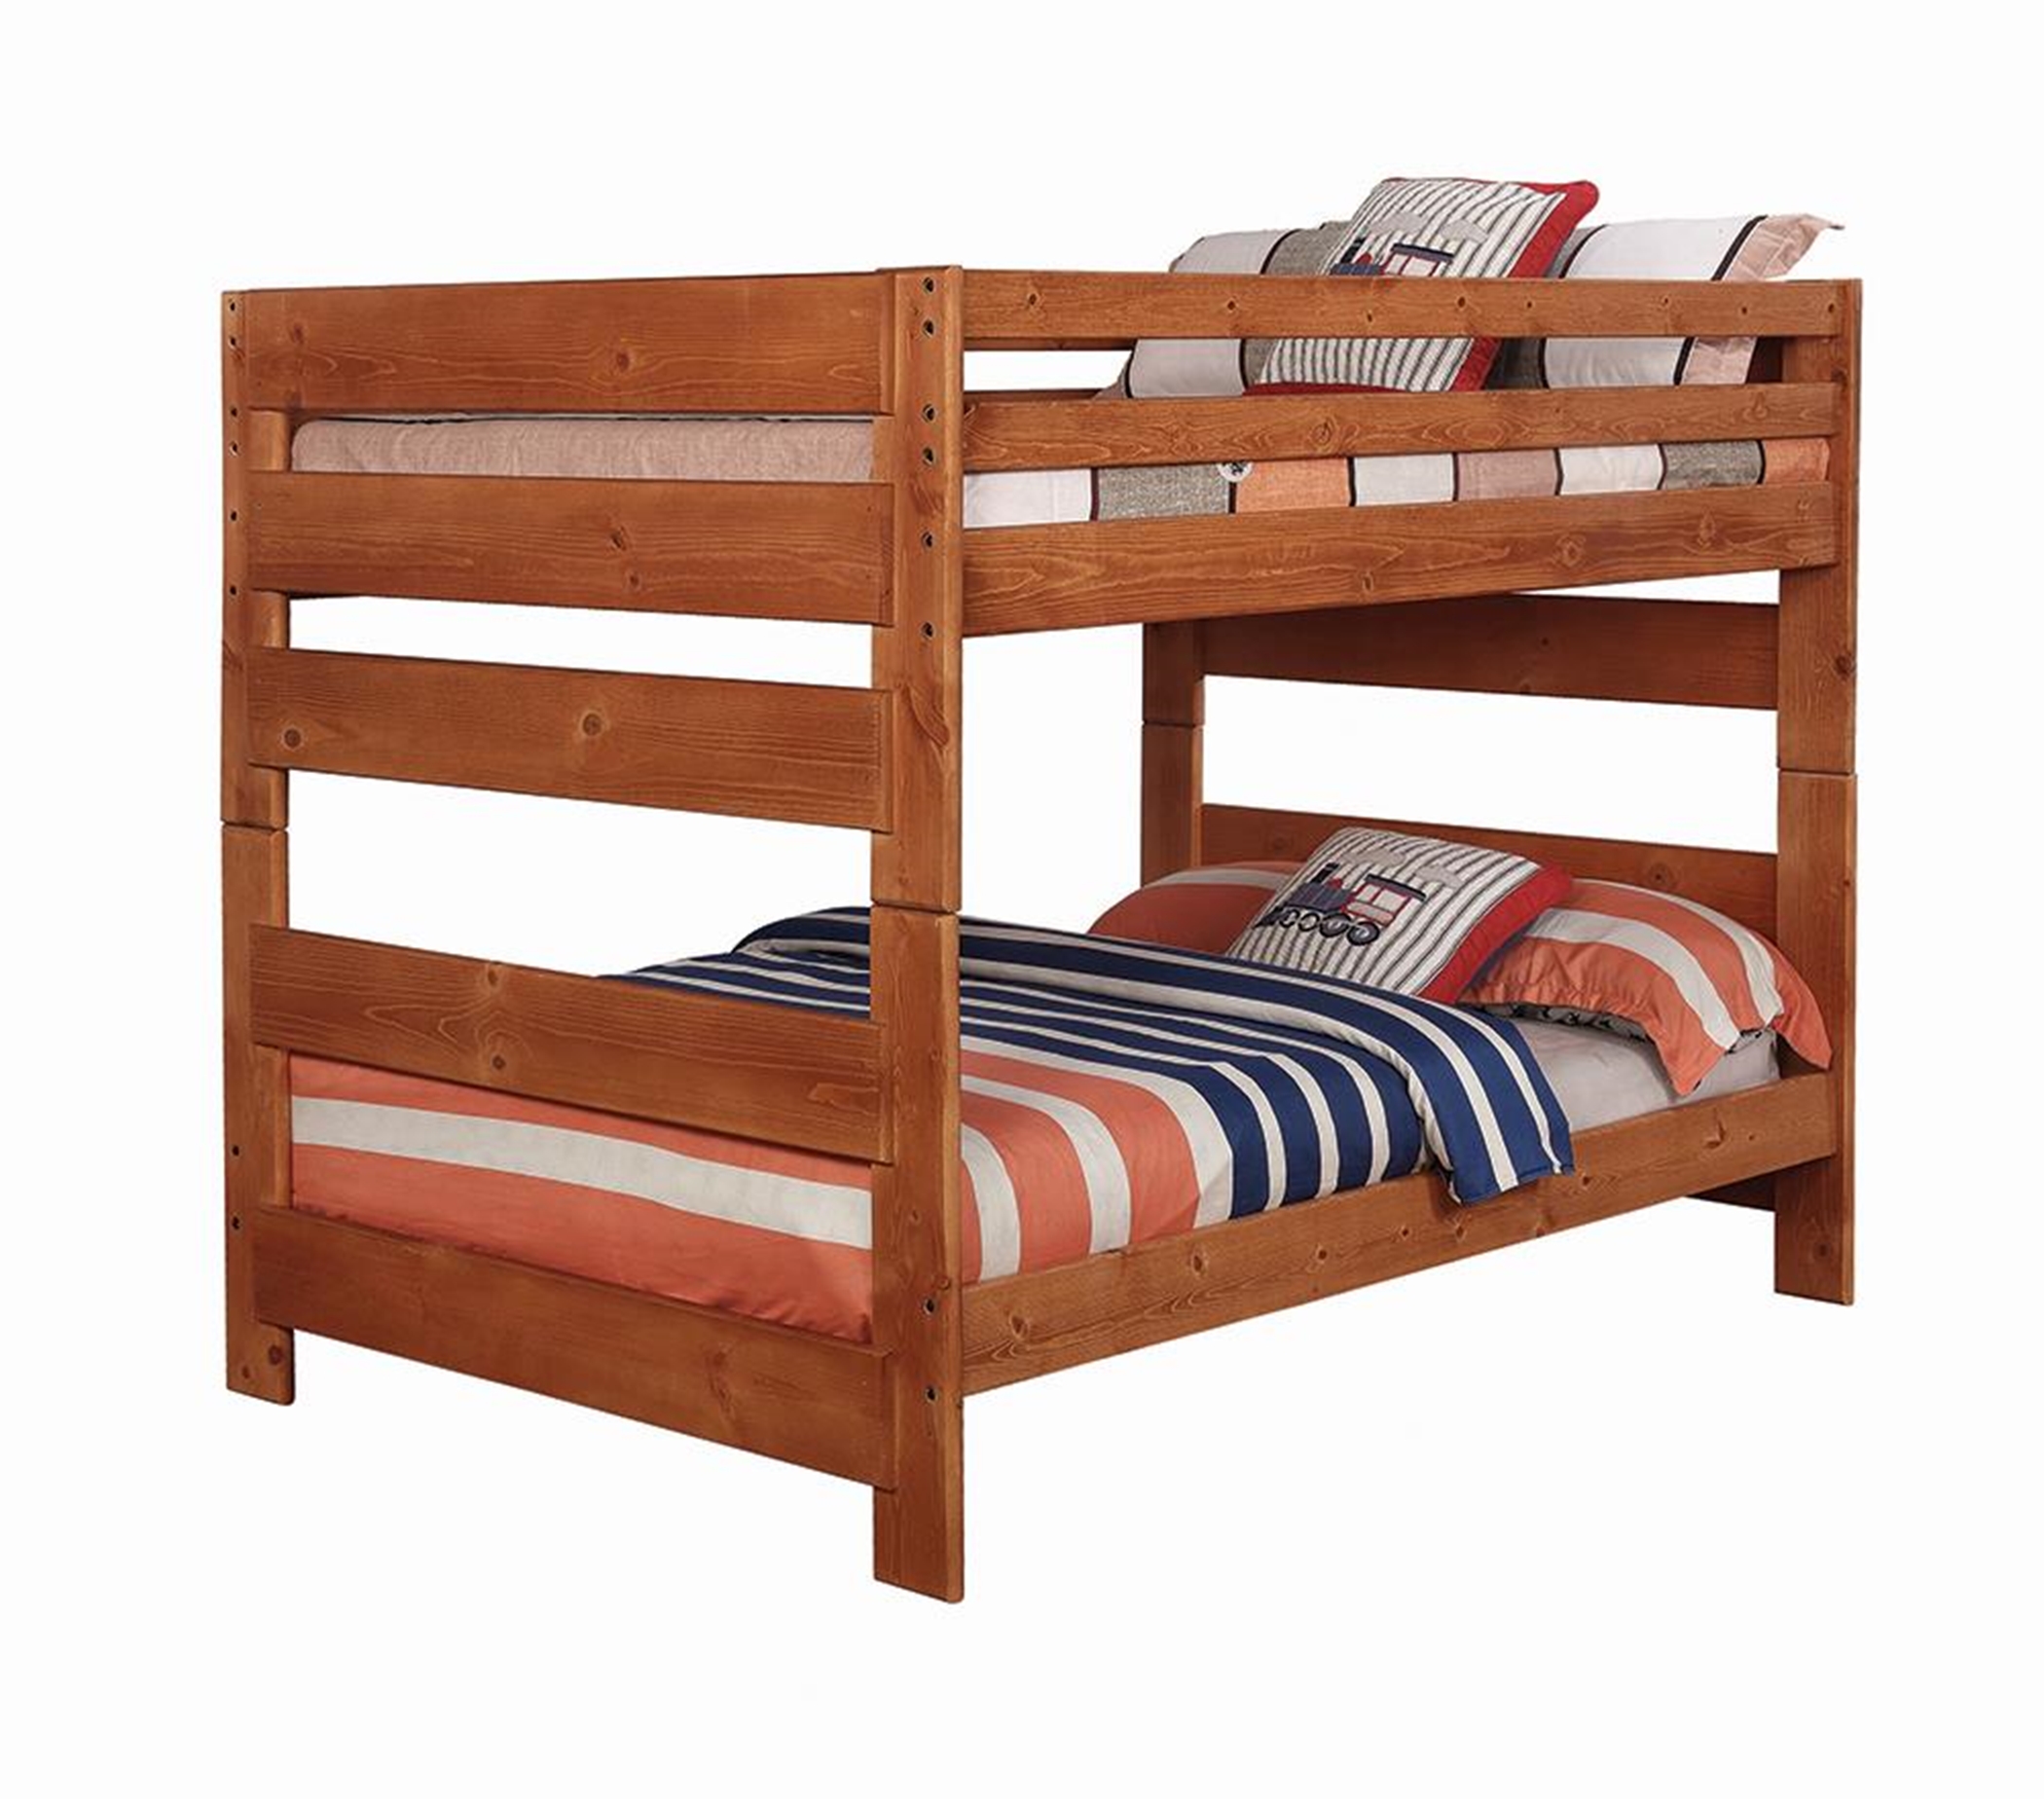 Wrangle Hill Amber Wash Full-over-Full Bunk Bed - Click Image to Close